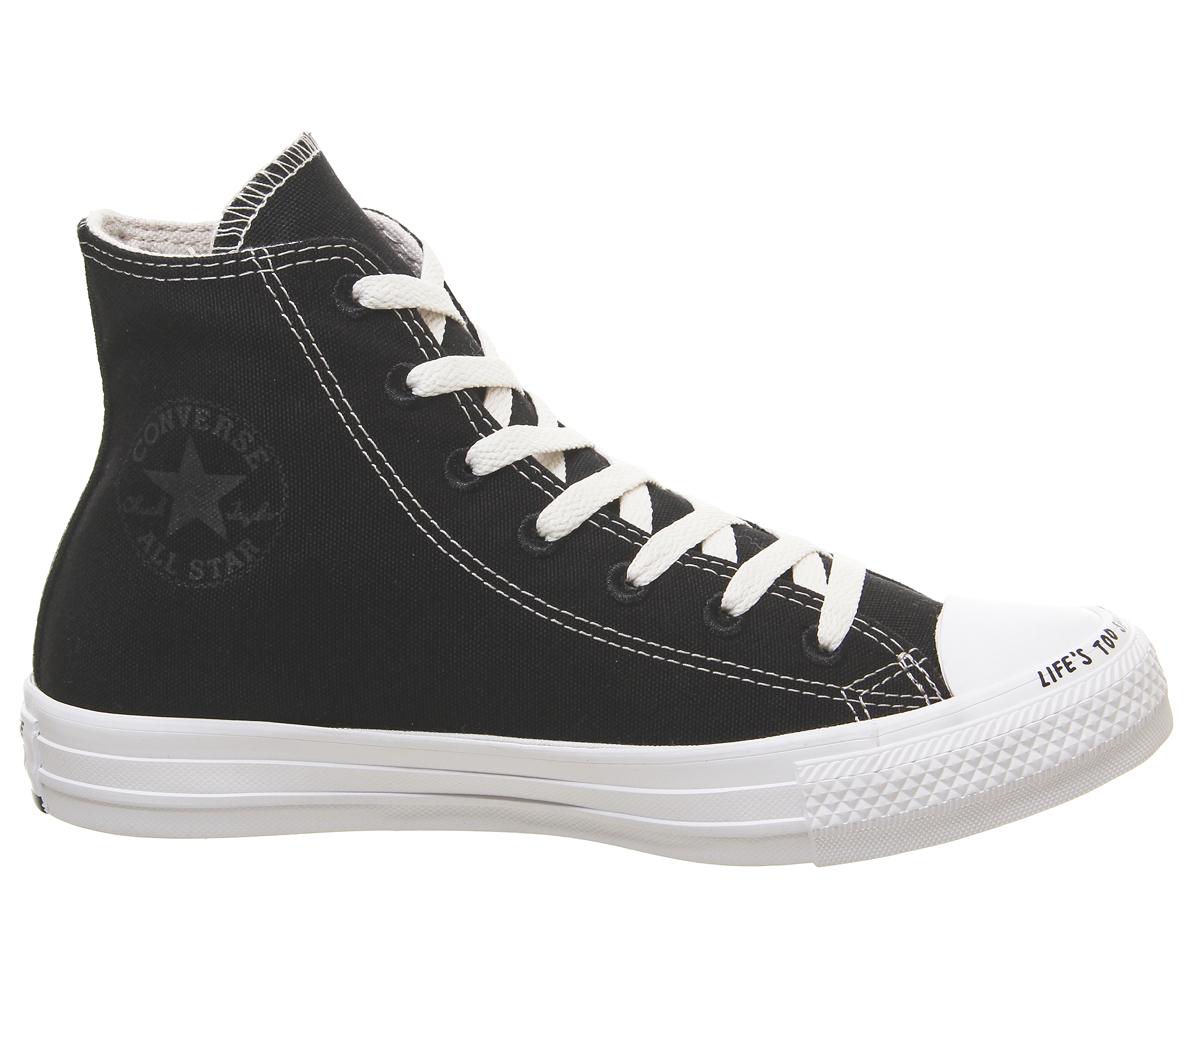 Converse Converse All Star Hi Trainers Black White Recycle - Unisex Sports